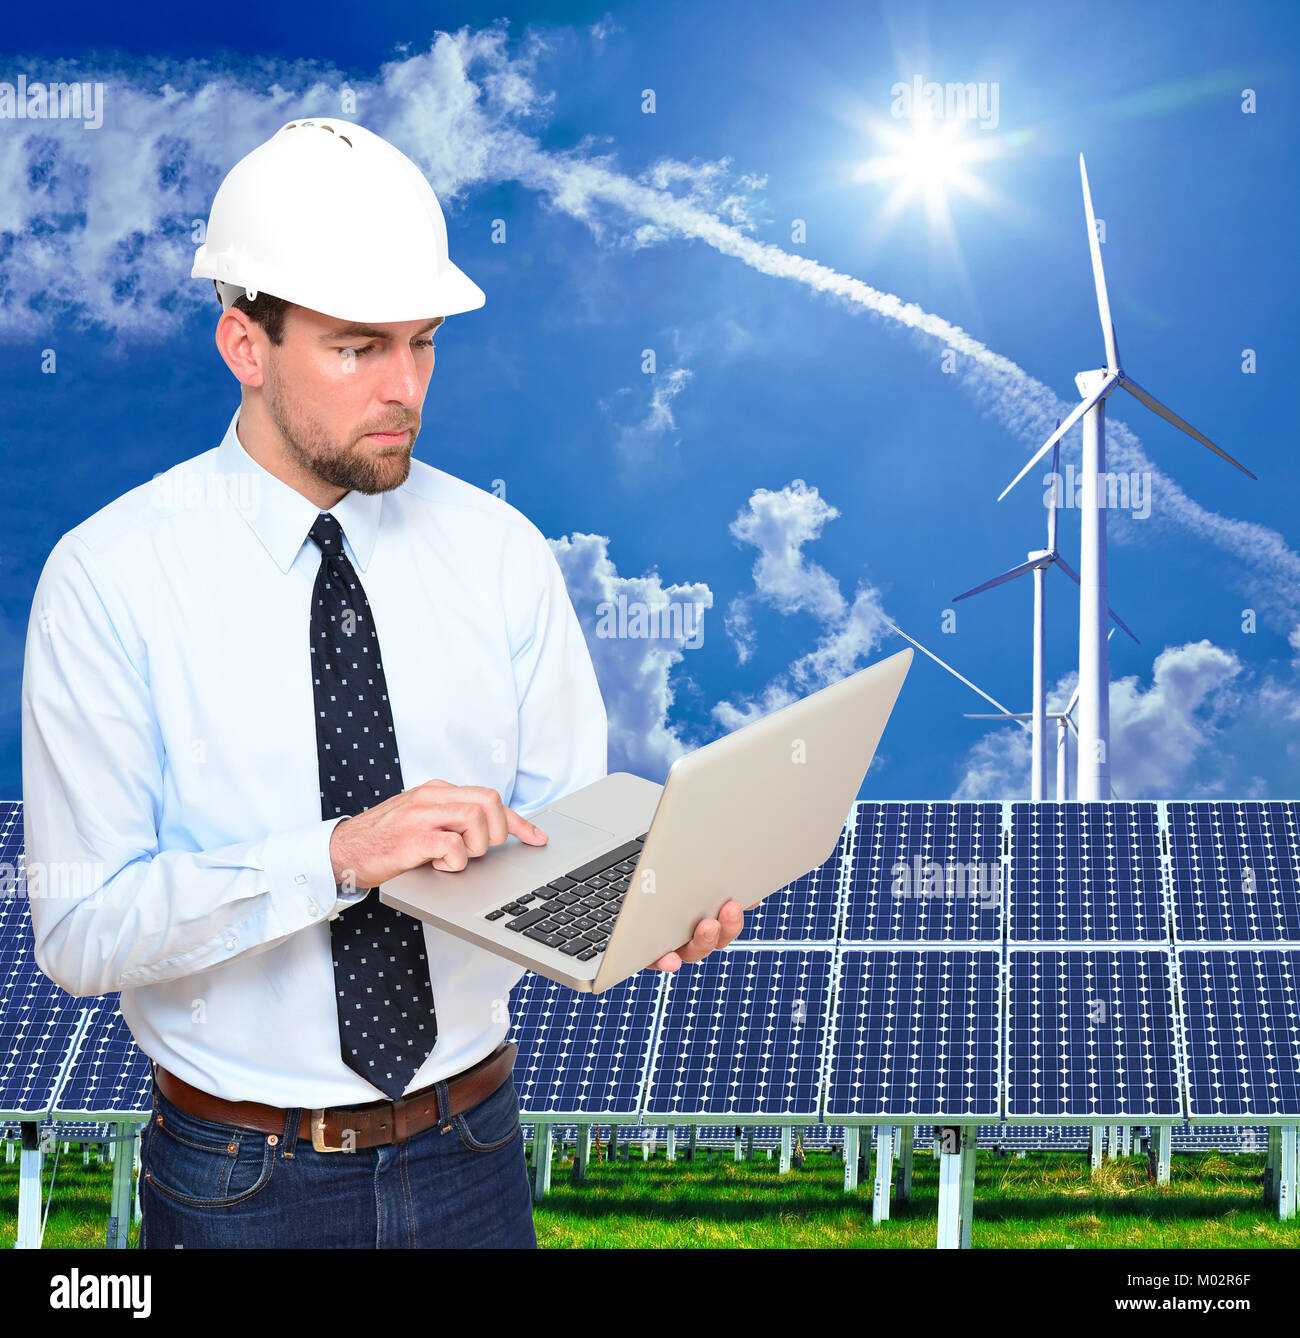 ingenieur works in the energy industry - environmentally friendly power generation with alternative energies such as wind and solar energy Stock Photo